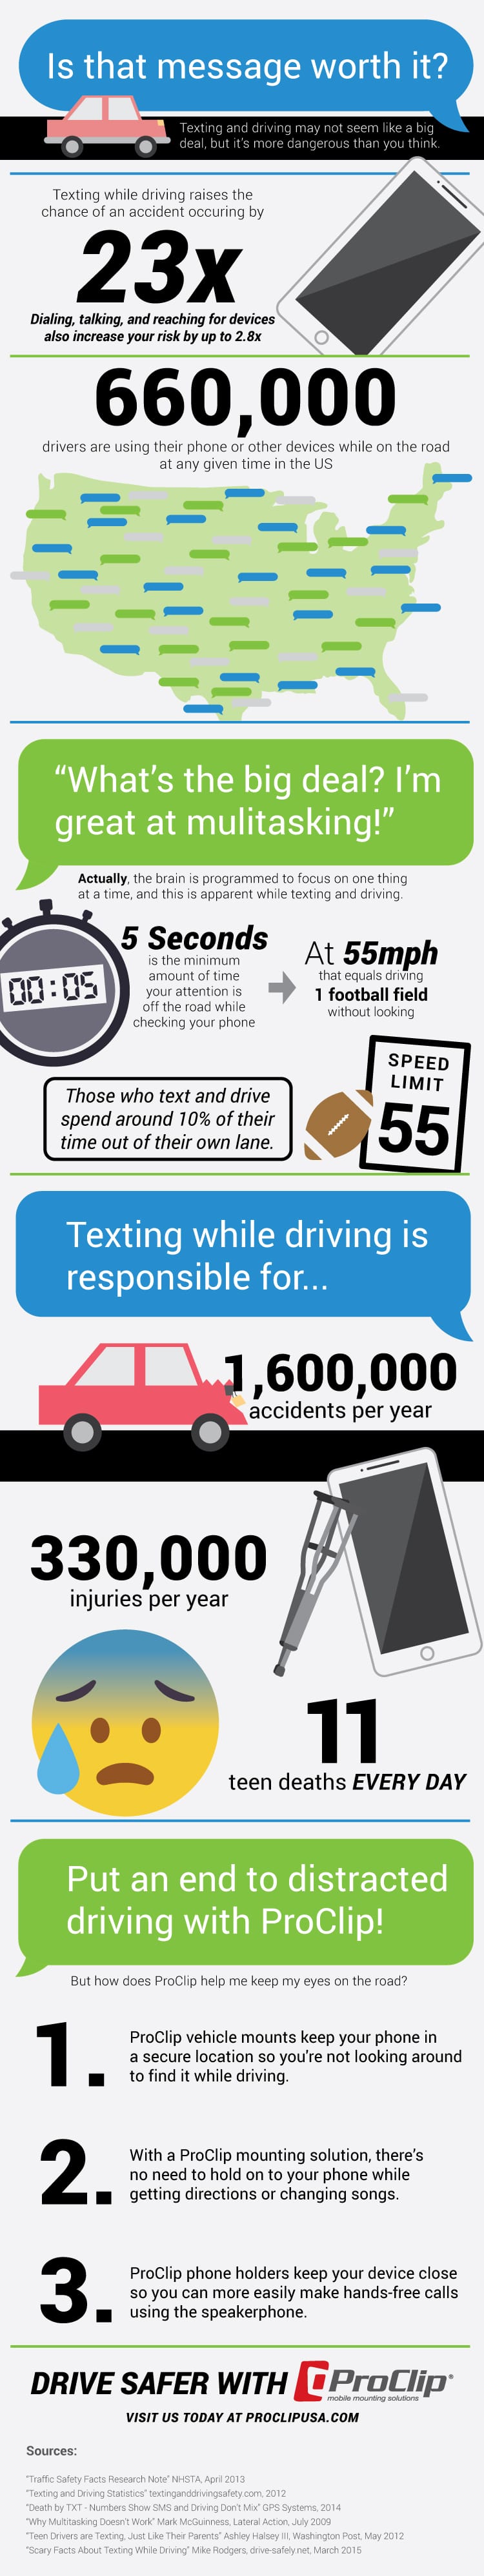 Safe Driving Infographic